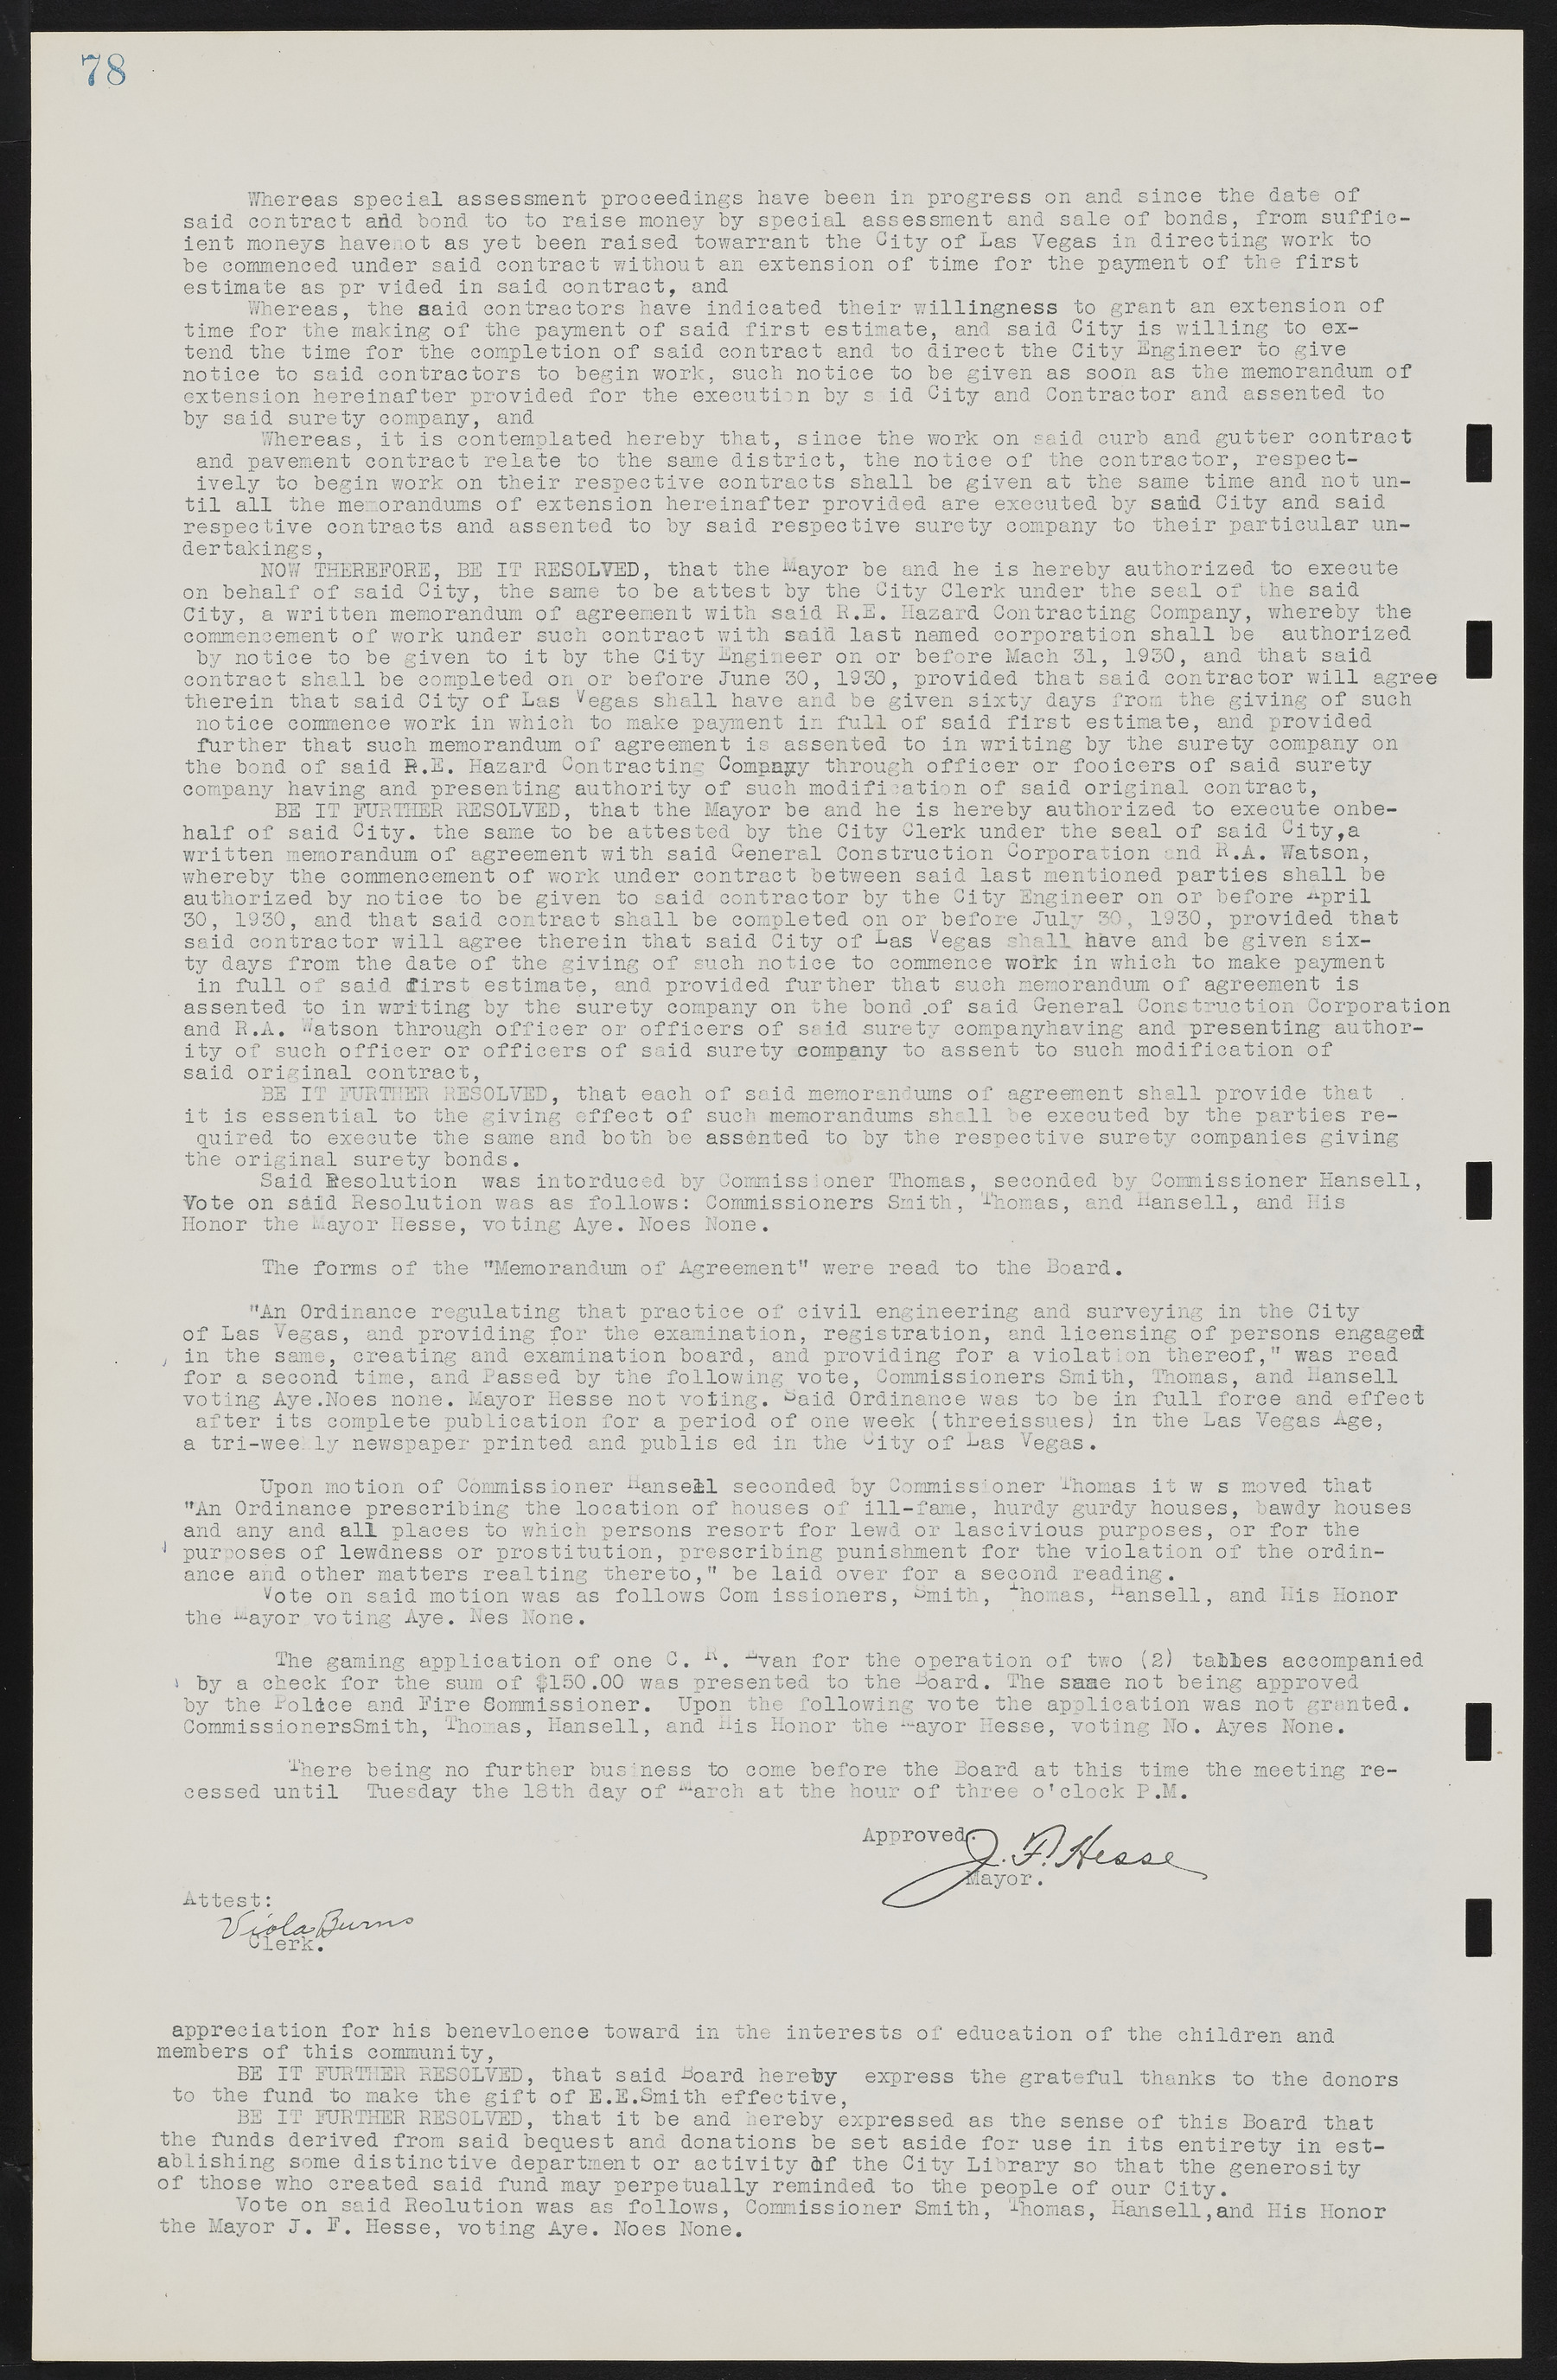 Las Vegas City Commission Minutes, May 14, 1929 to February 11, 1937, lvc000003-84